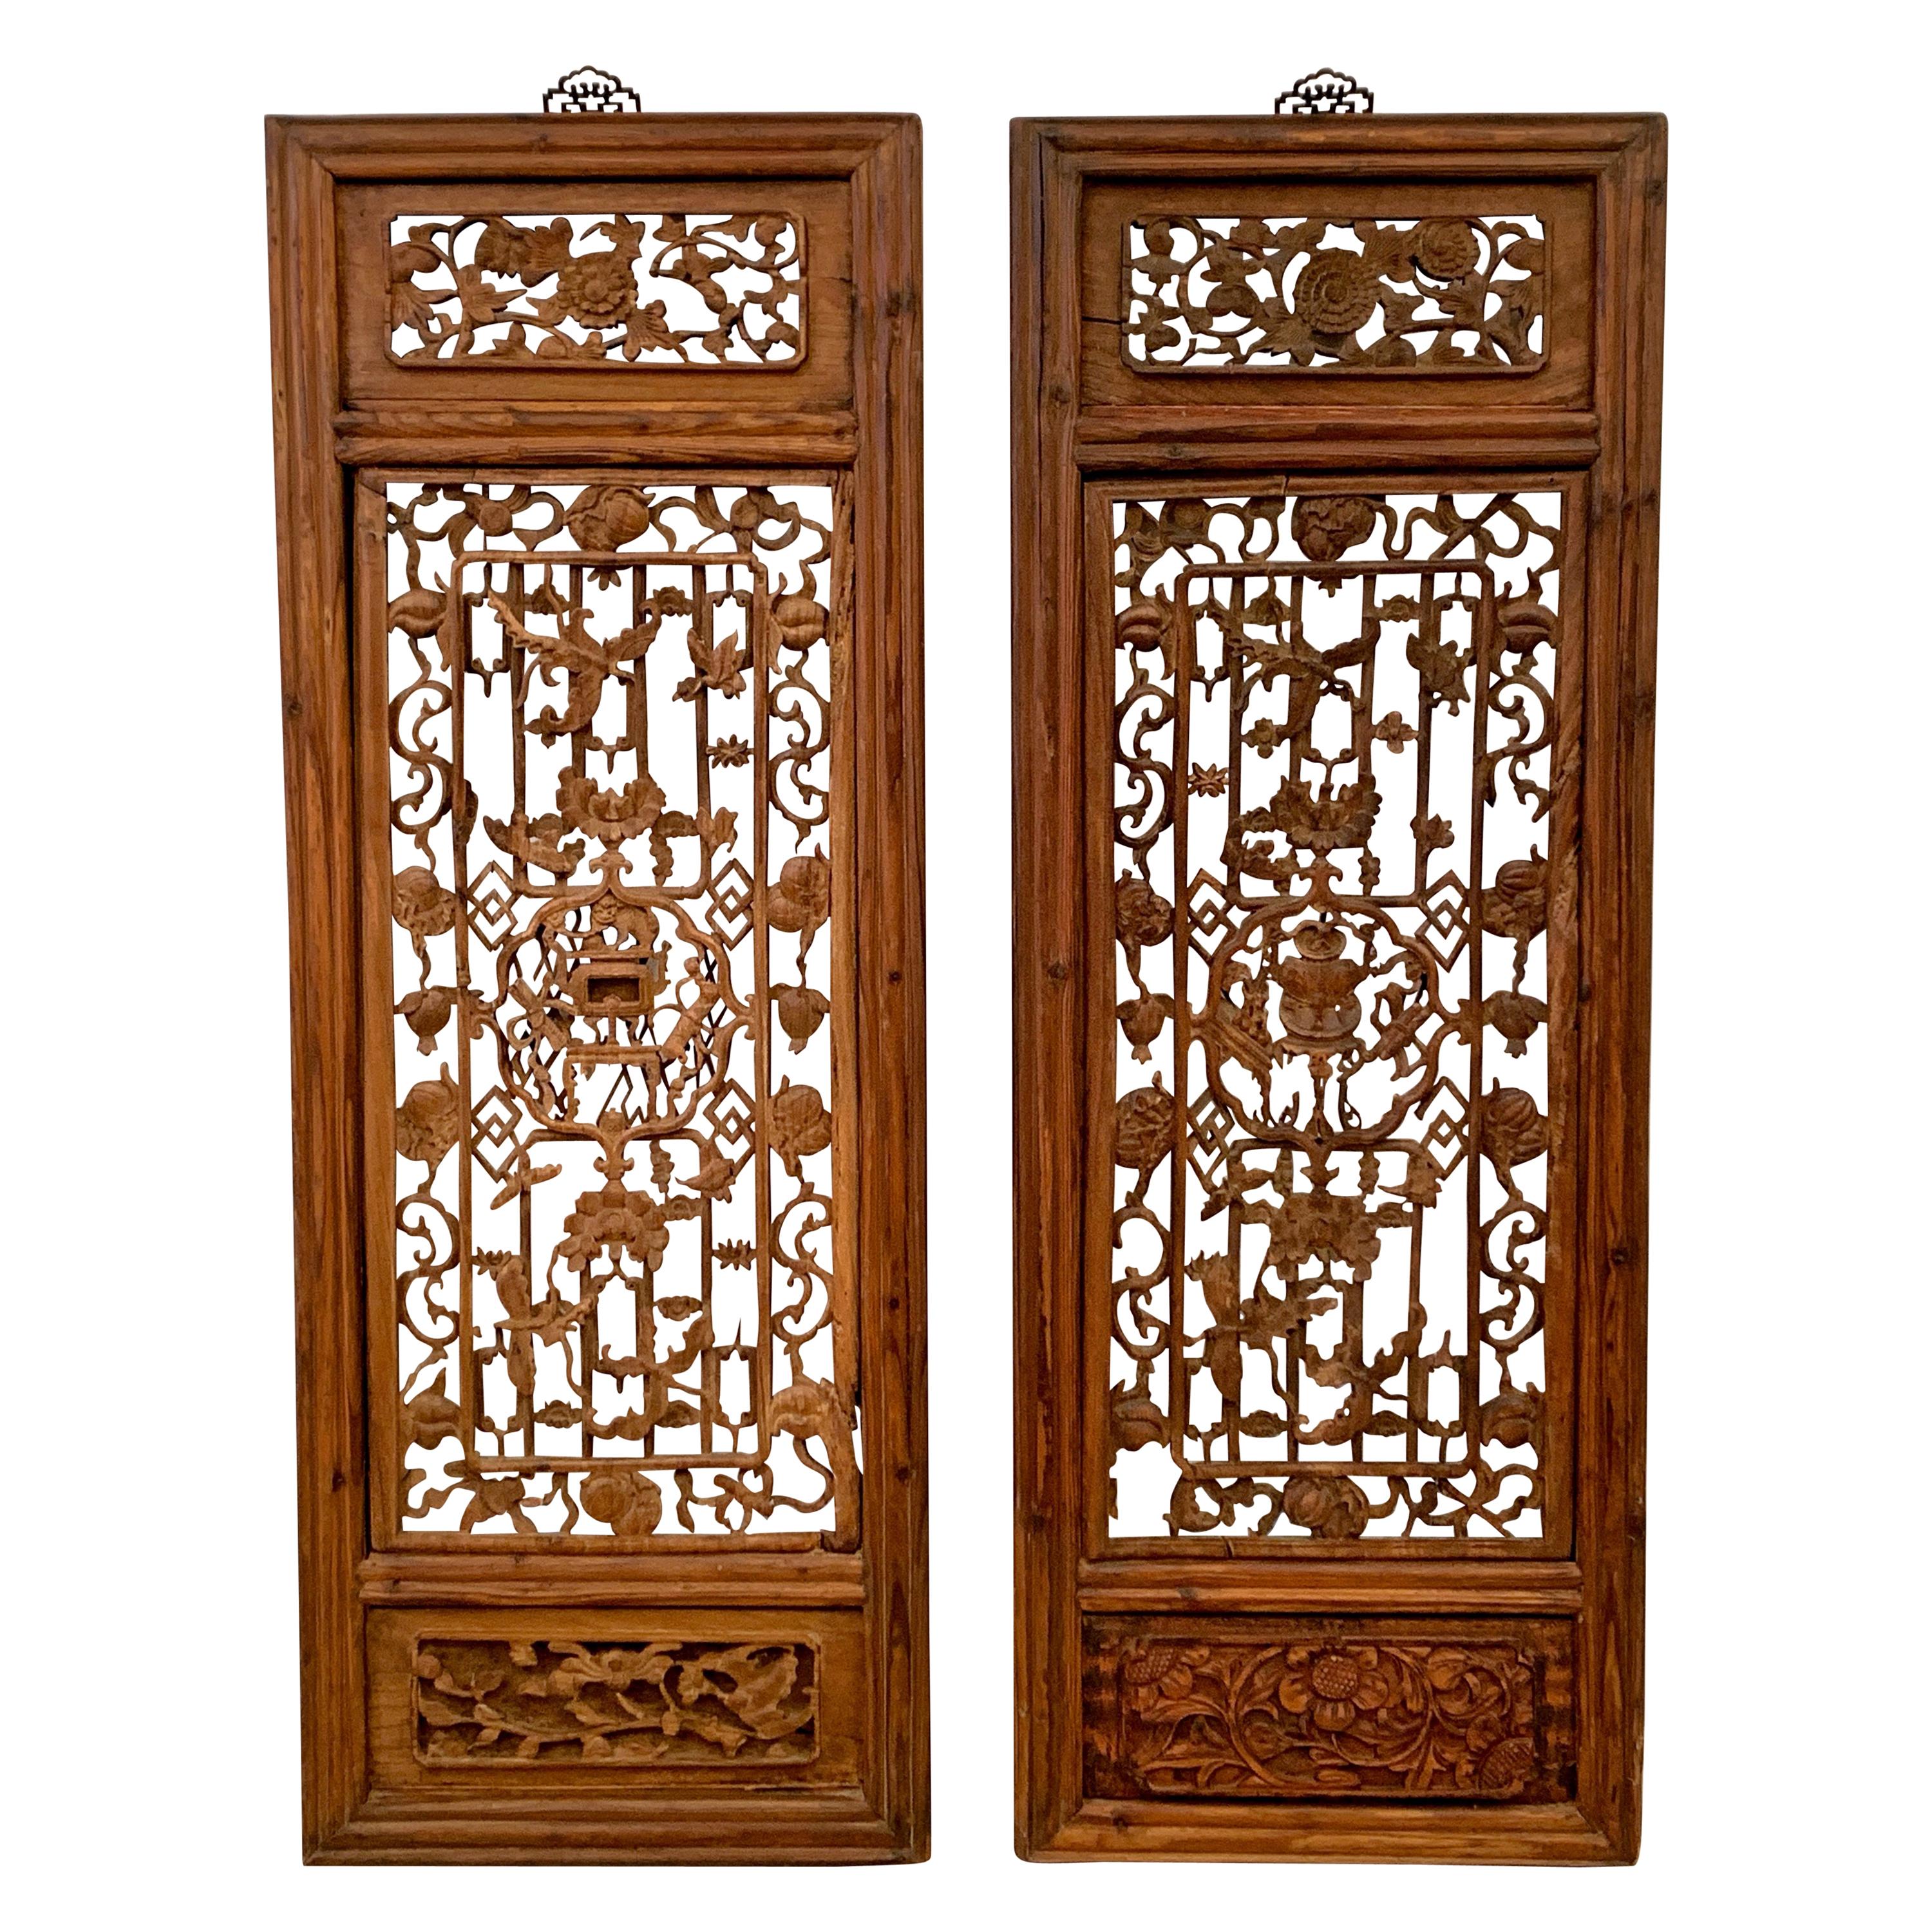 Pair Chinese Carved Hanging Window Panels, Qing Dynasty, 18th Century, China